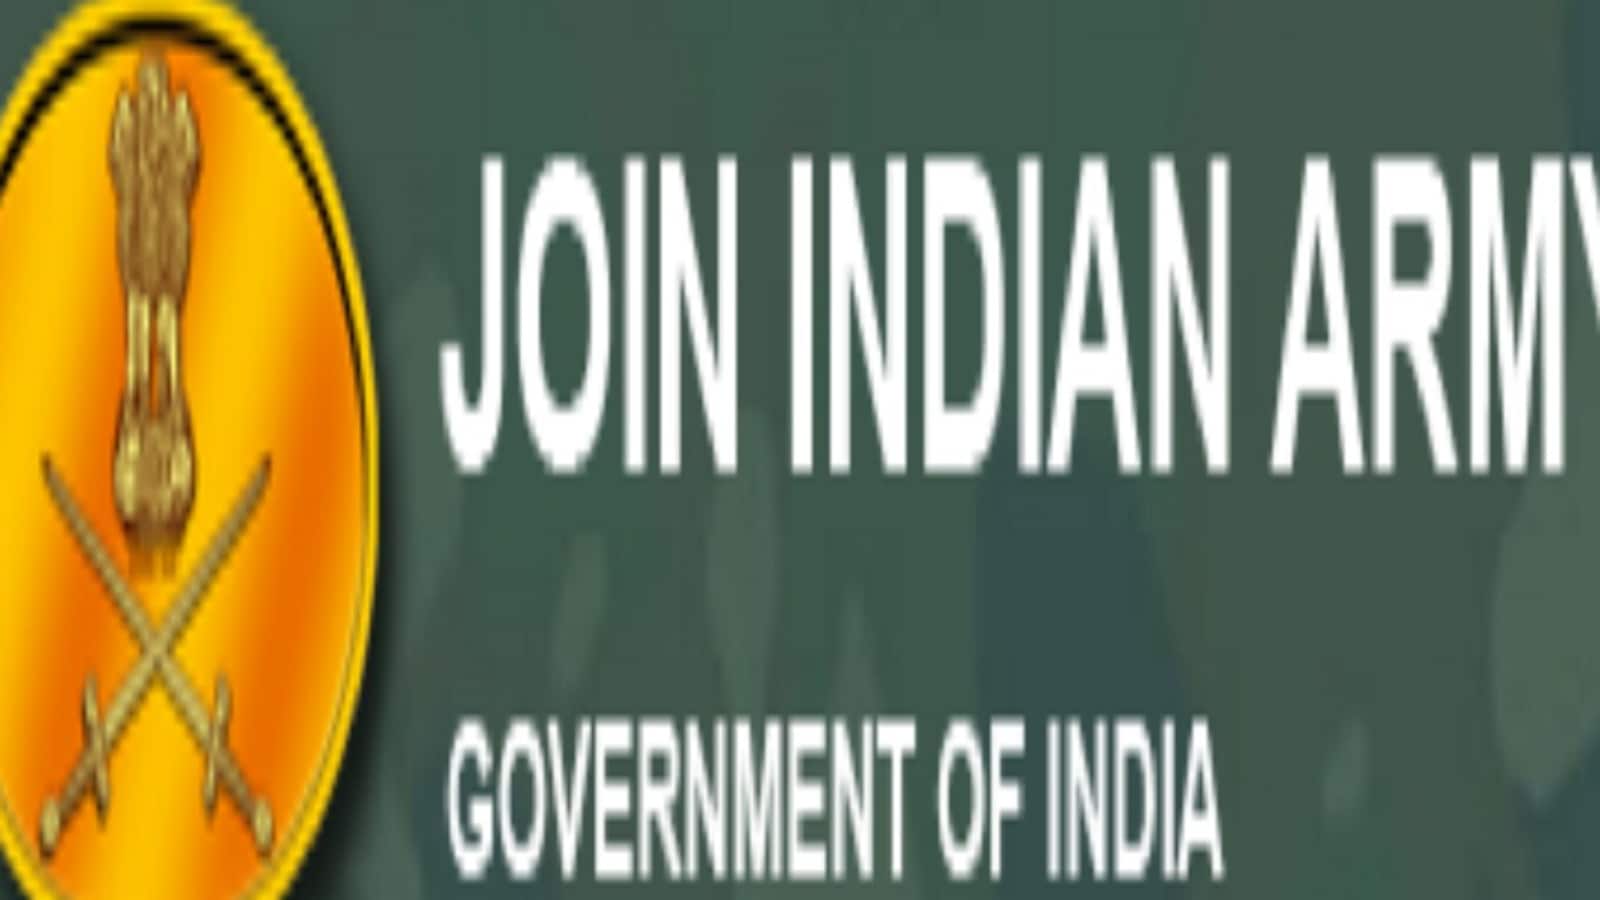 Join Indian Army 2021: Last date to apply today for 191 SSC Officer posts